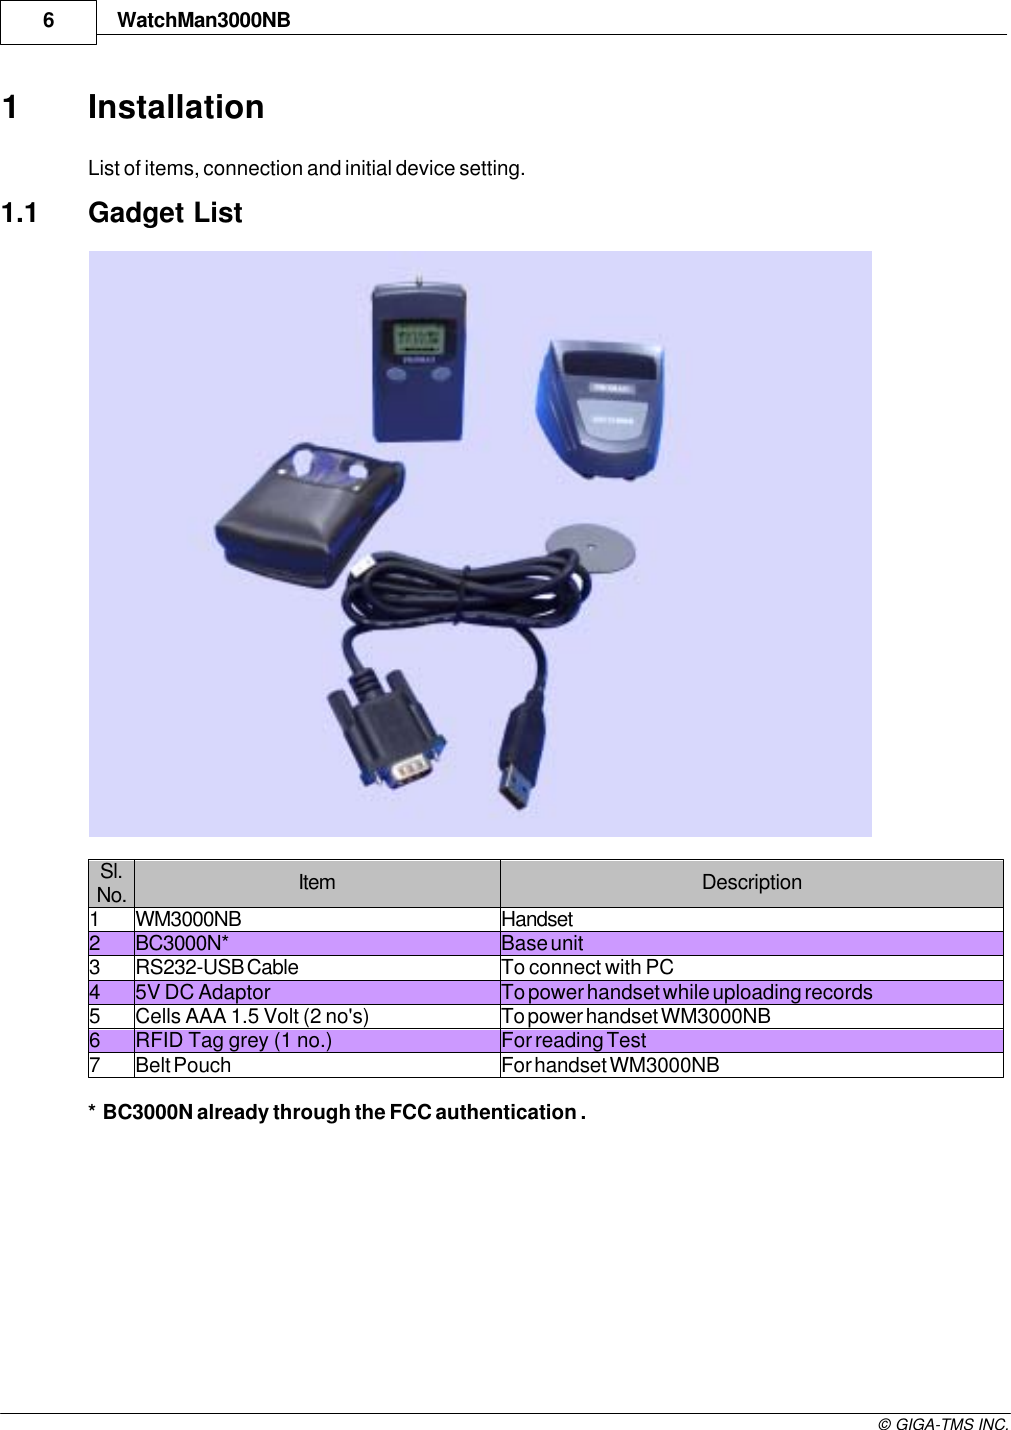 WatchMan3000NB6© GIGA-TMS INC.1 InstallationList of items, connection and initial device setting.1.1 Gadget ListSl.No. Item Description1WM3000NB Handset2BC3000N* Base unit3RS232-USB Cable To connect with PC45V DC Adaptor To power handset while uploading records5Cells AAA 1.5 Volt (2 no&apos;s) To power handset WM3000NB6RFID Tag grey (1 no.) For reading Test7Belt Pouch For handset WM3000NB* BC3000N already through the FCC authentication .